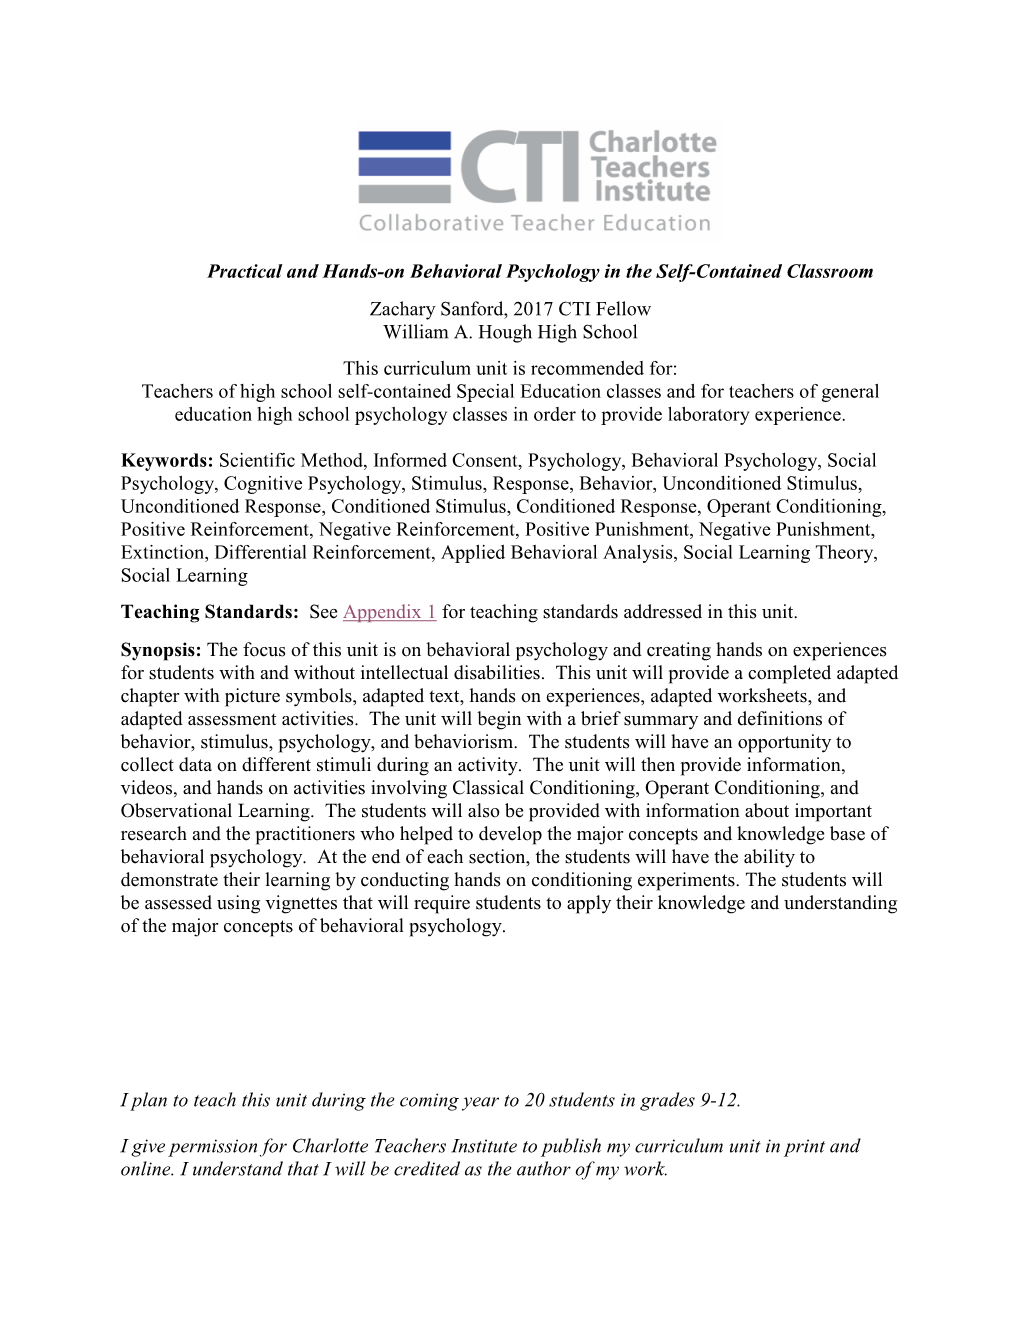 Practical and Hands-On Behavioral Psychology in the Self-Contained Classroom Zachary Sanford, 2017 CTI Fellow William A